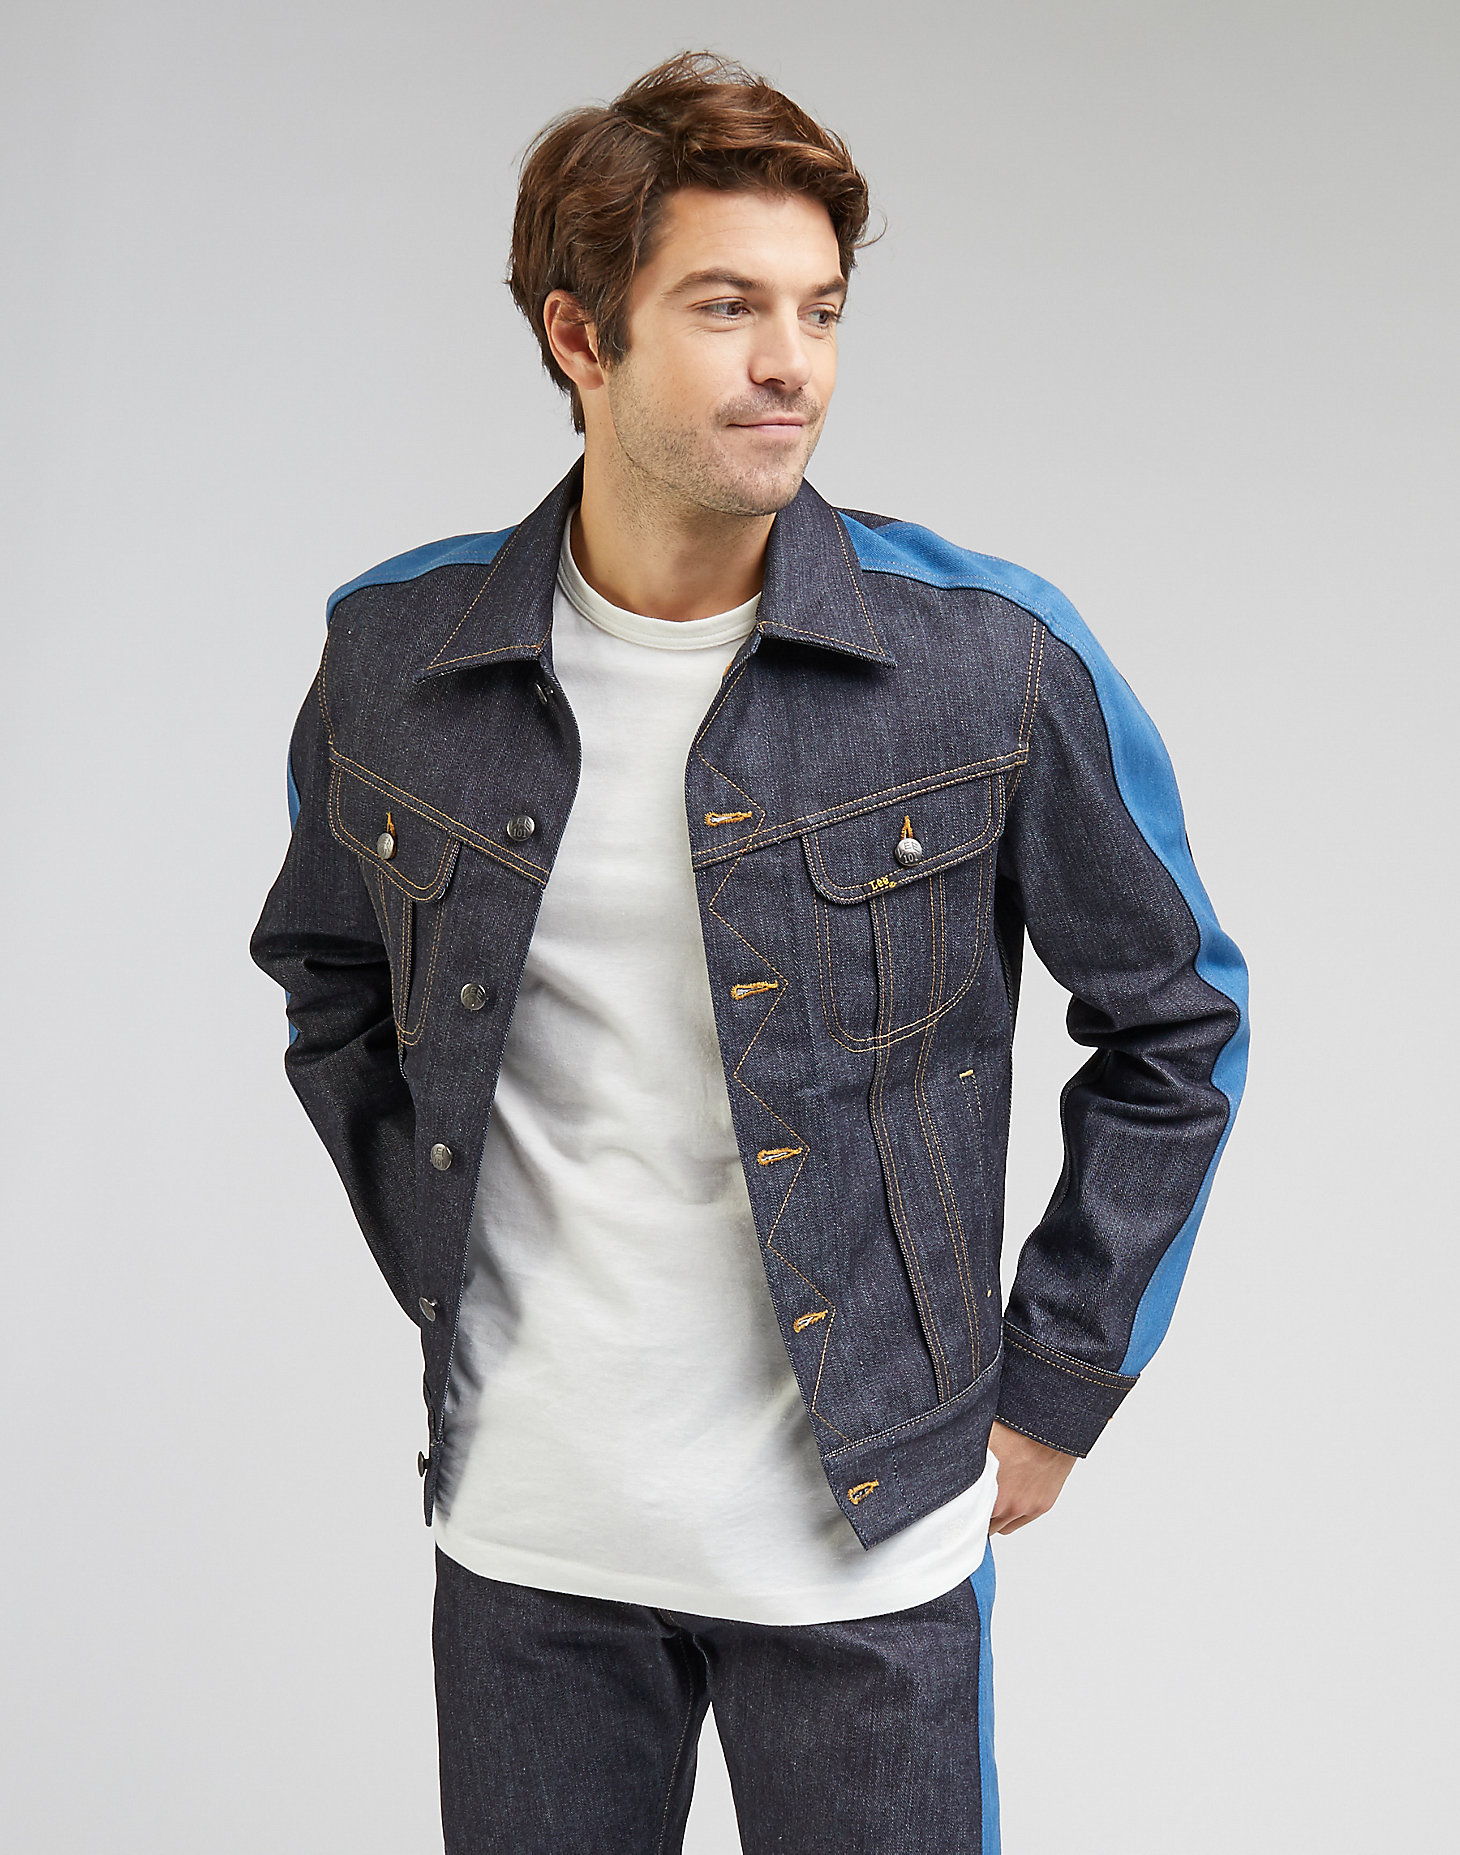 101 Panelled Rider Jacket in Dry main view